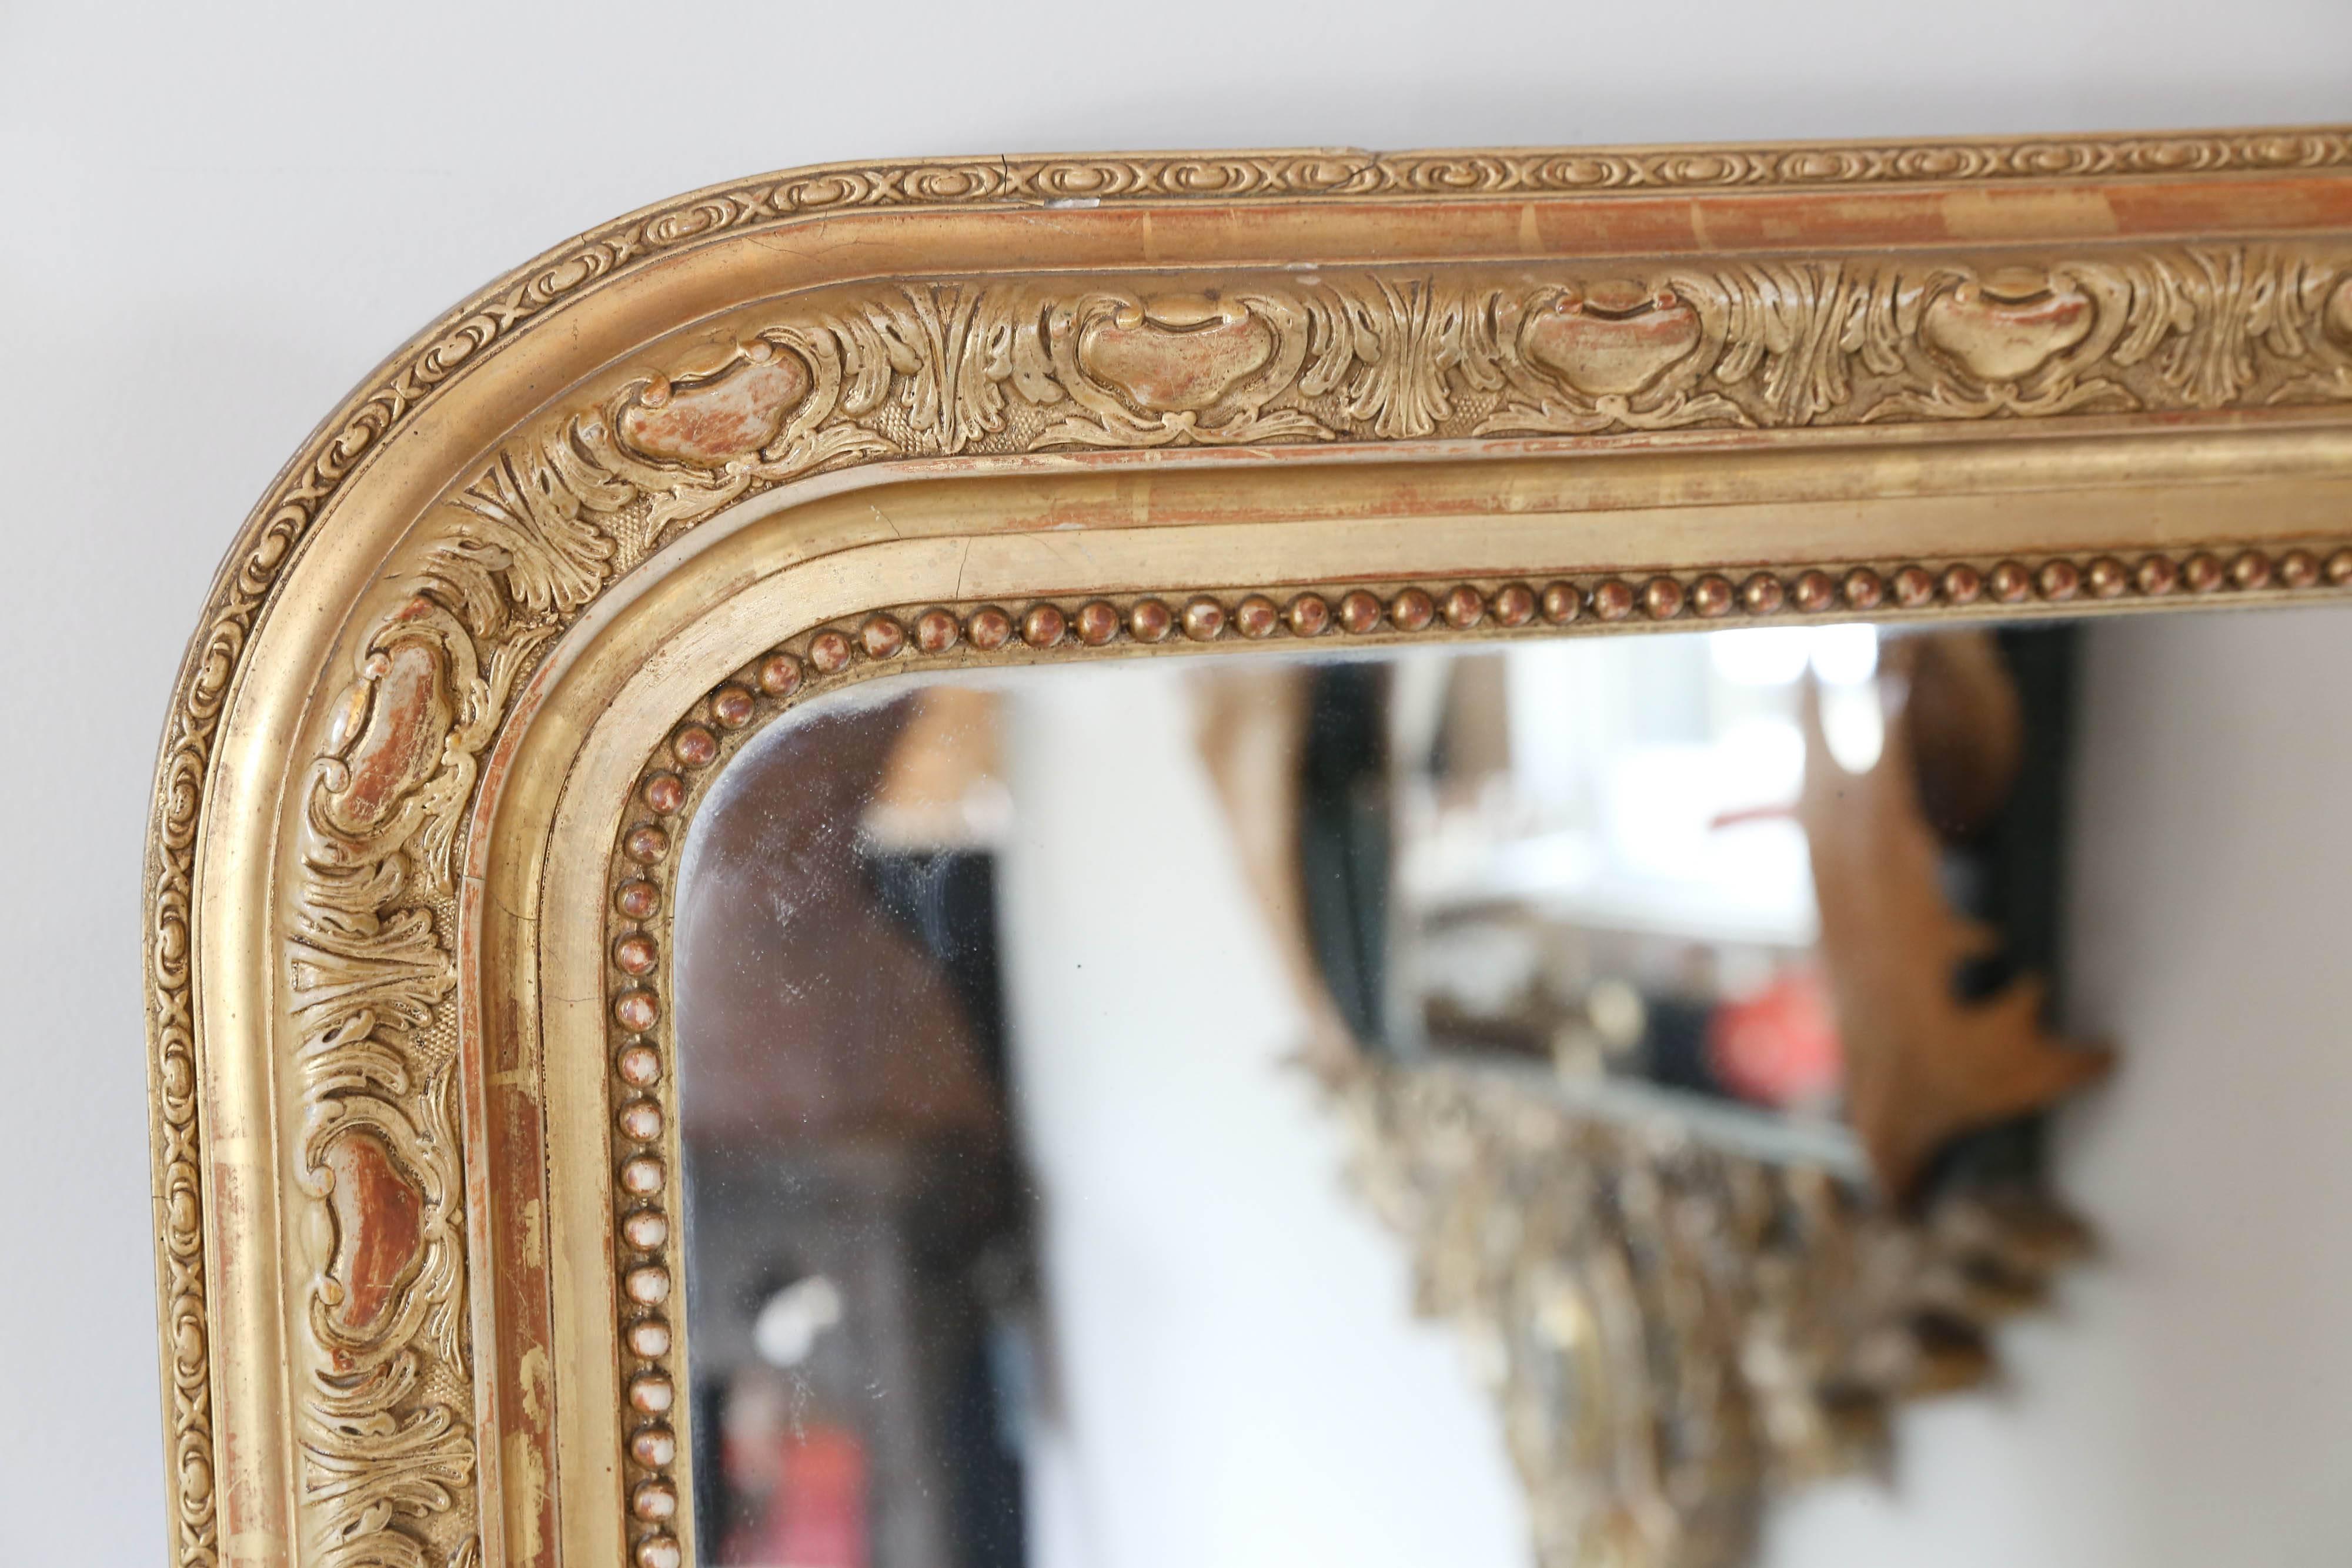 This antique Louis Philippe mirror features beautiful art nouveau carvings around the frame. the mirror is in very good condition and this piece does have a covered back. See images for full details. 

Measures 37.5